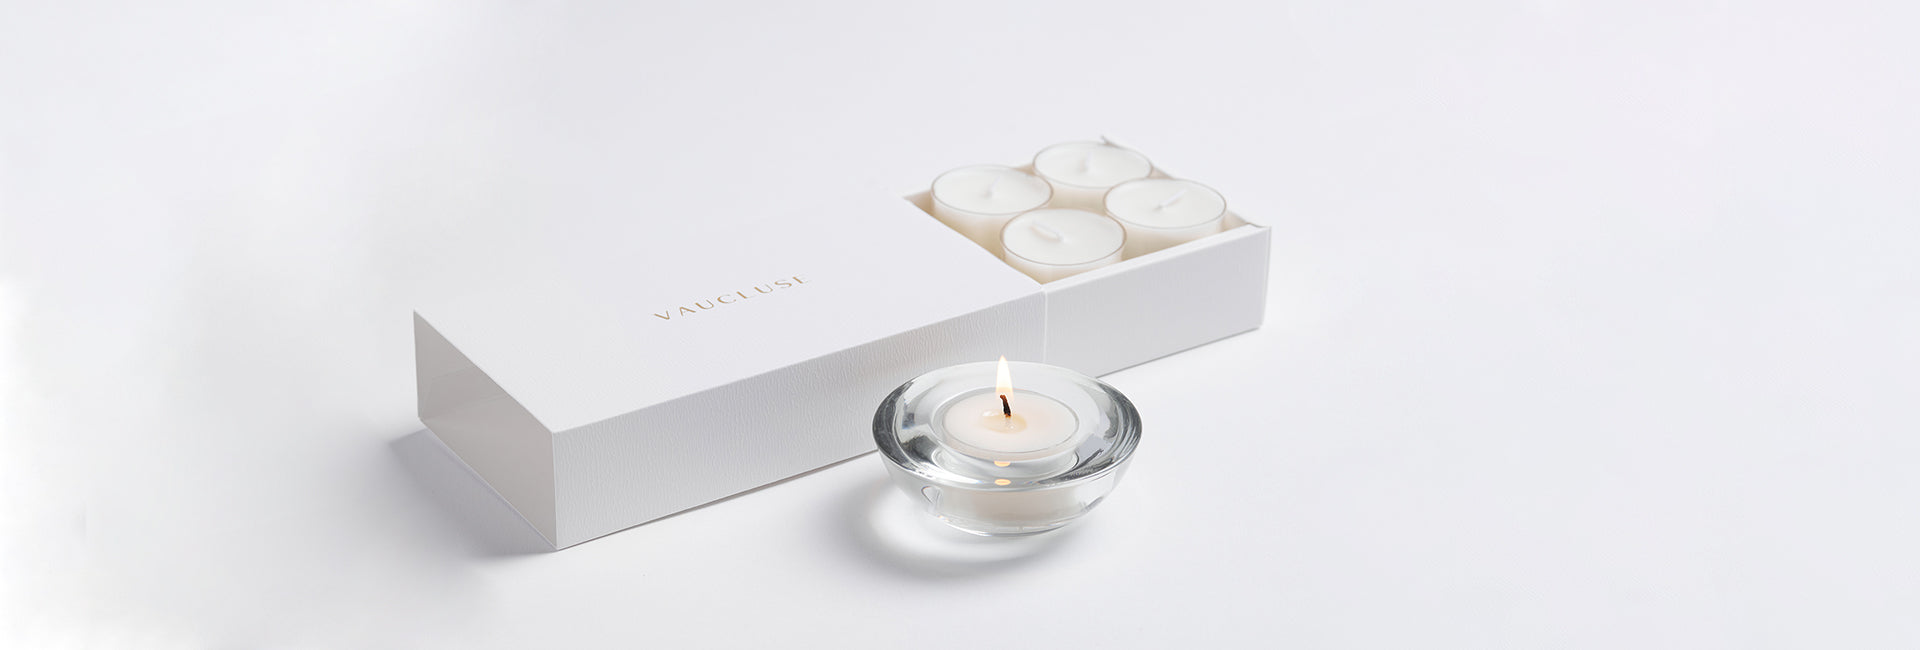 Tealight Candles - VAUCLUSE